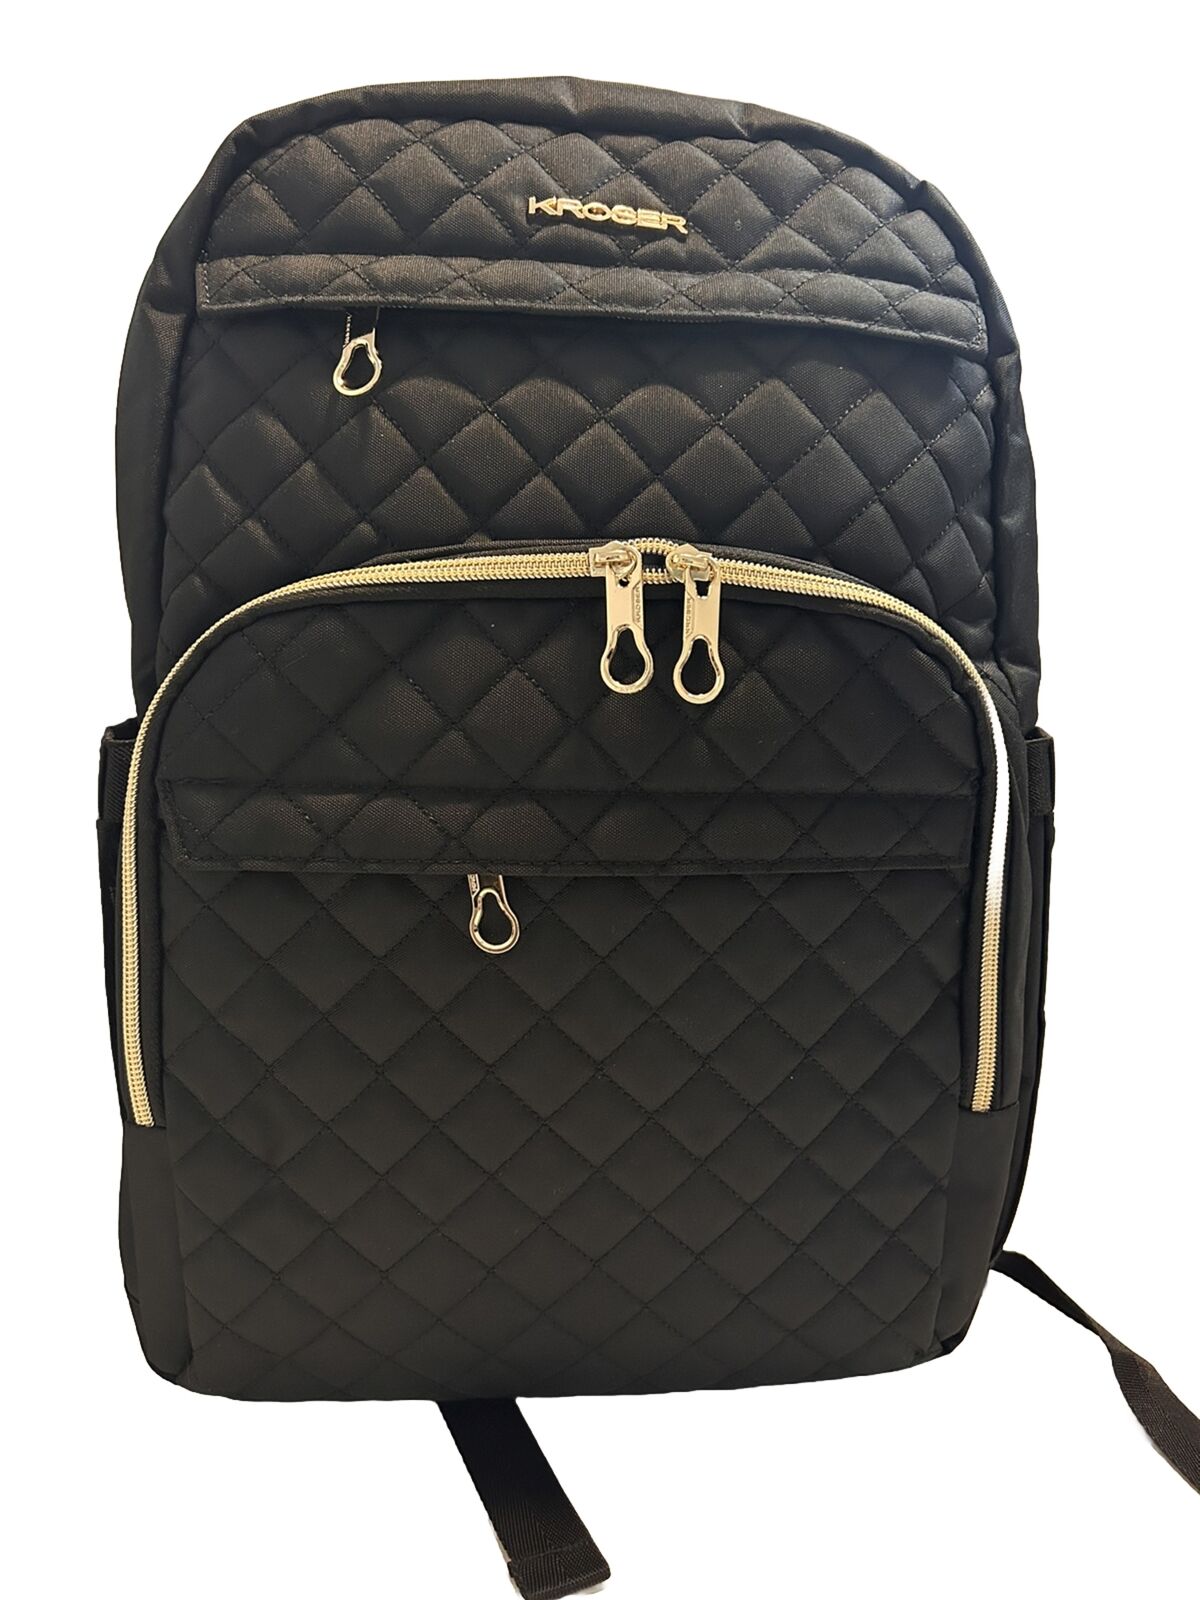 Kroser Laptop Backpack 15.6” Stylish Daypack with USB Charging Quilted Black NWO